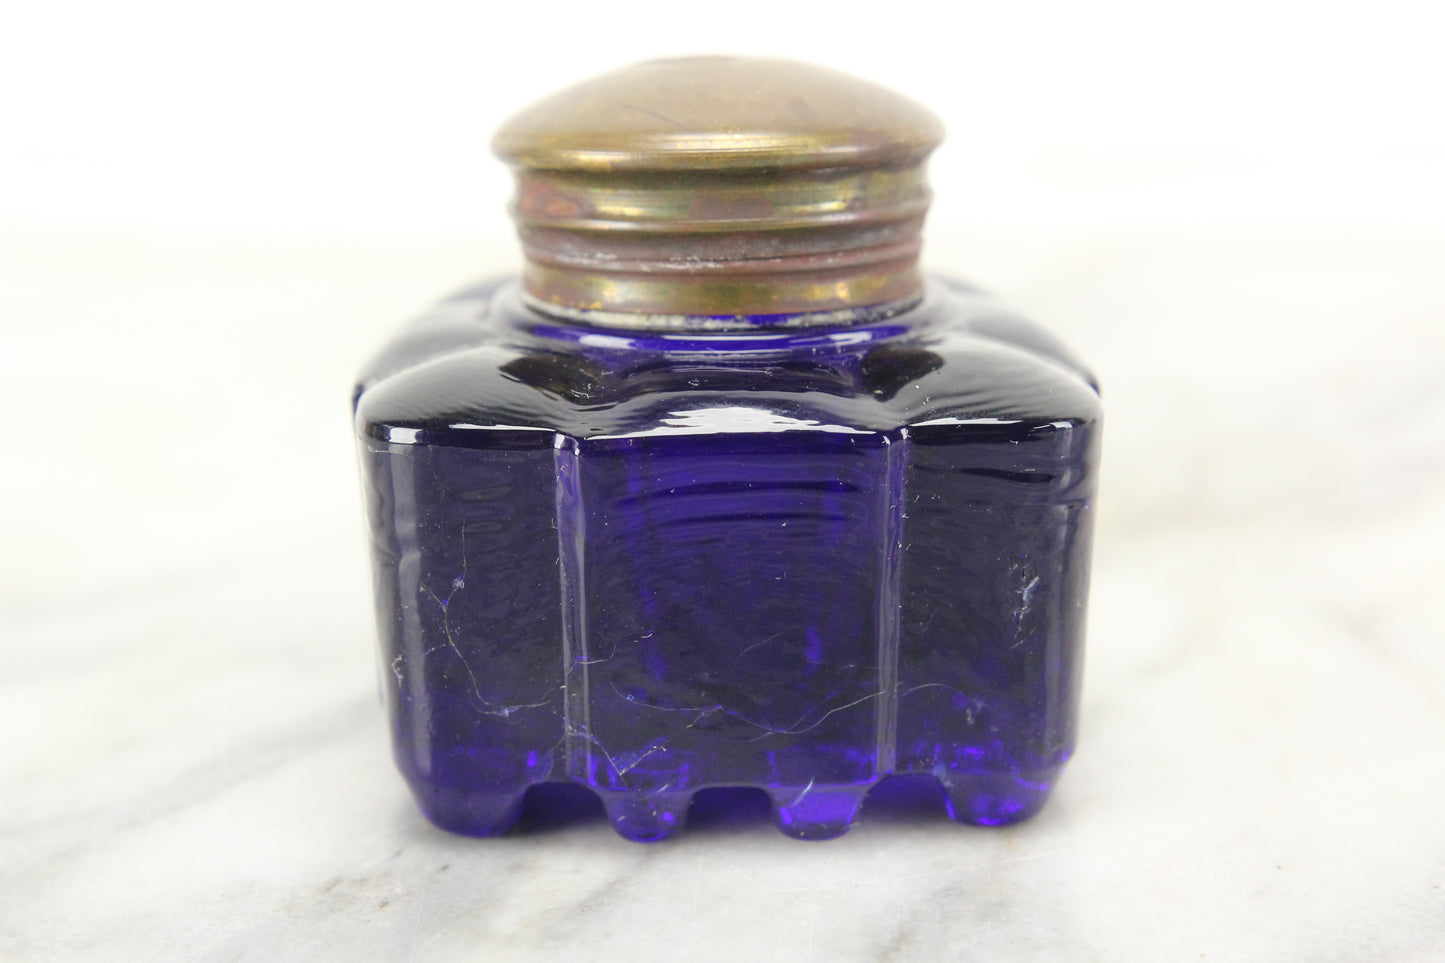 Antique Cobalt Blue Glass Square Inkwell with Brass Top Lid